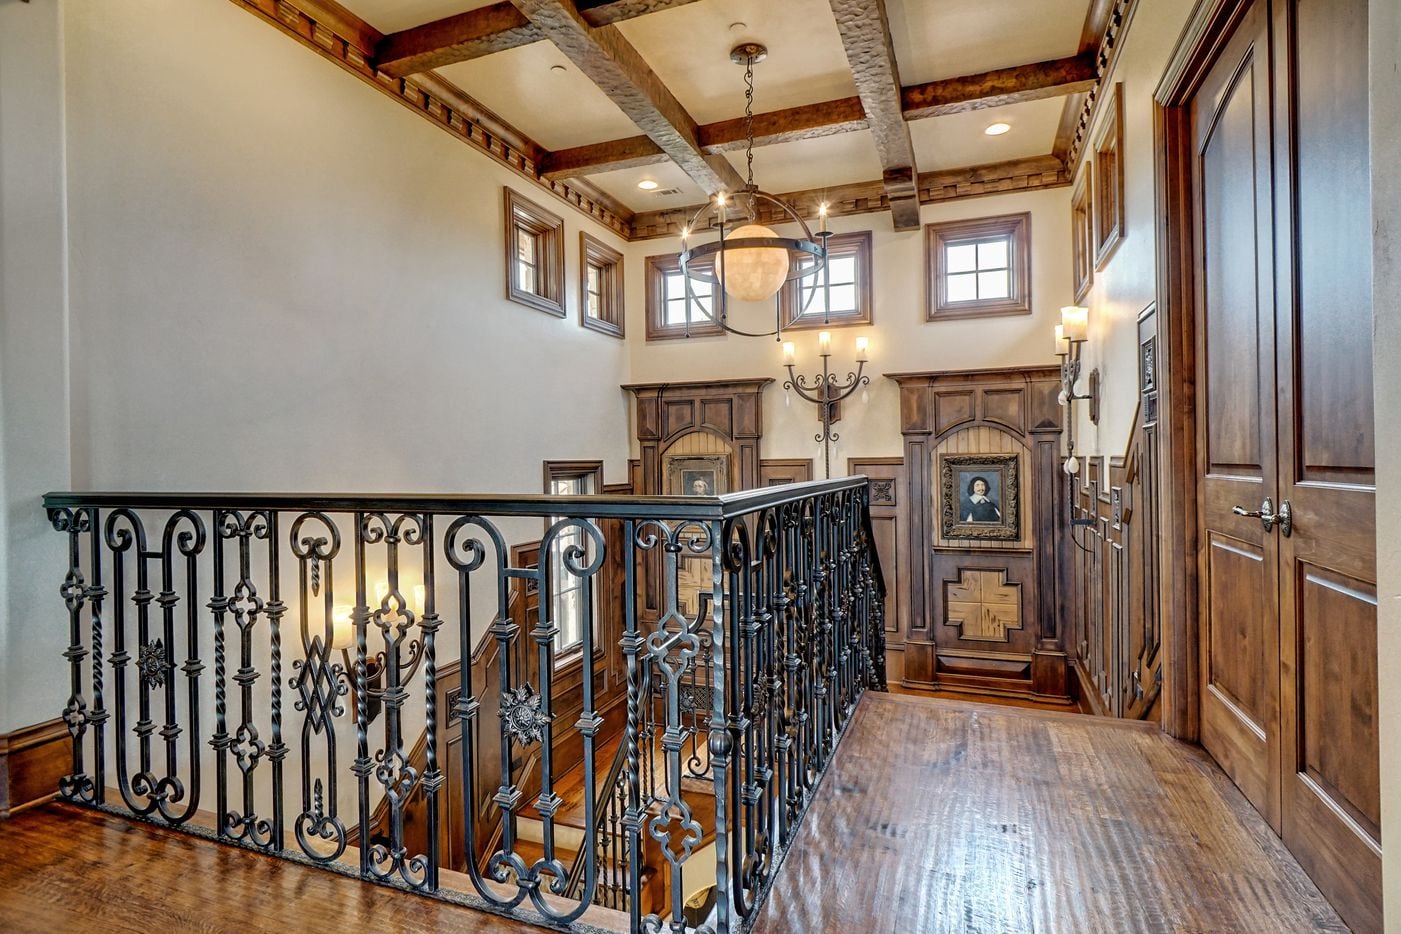 A look at the interior of 5513 Montclair Drive in Colleyville, TX.